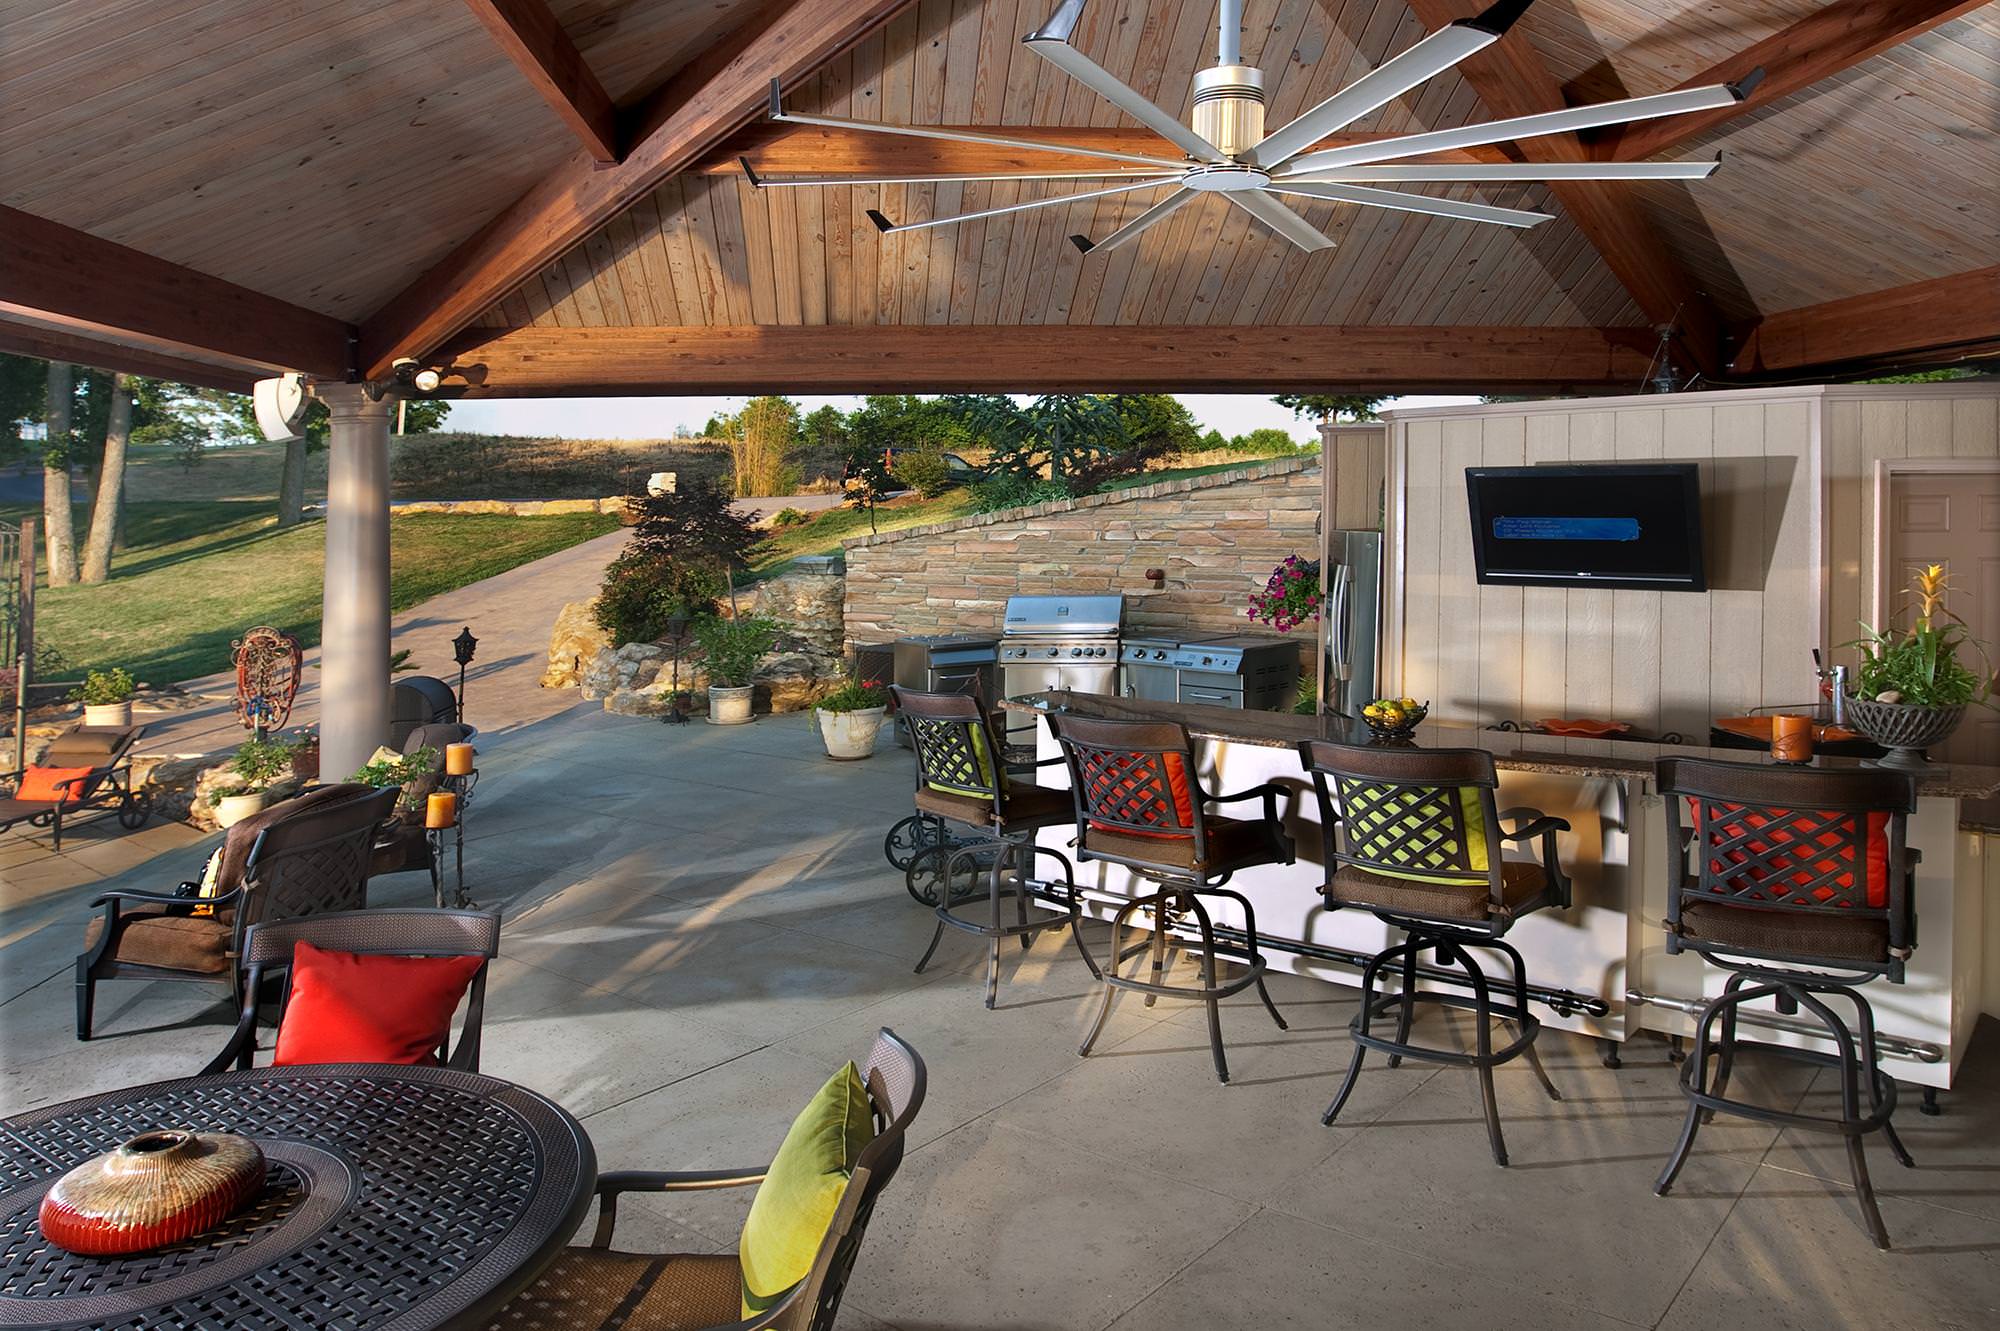 outdoor venue with a large ceiling fan, kitchen, and tables with chairs.